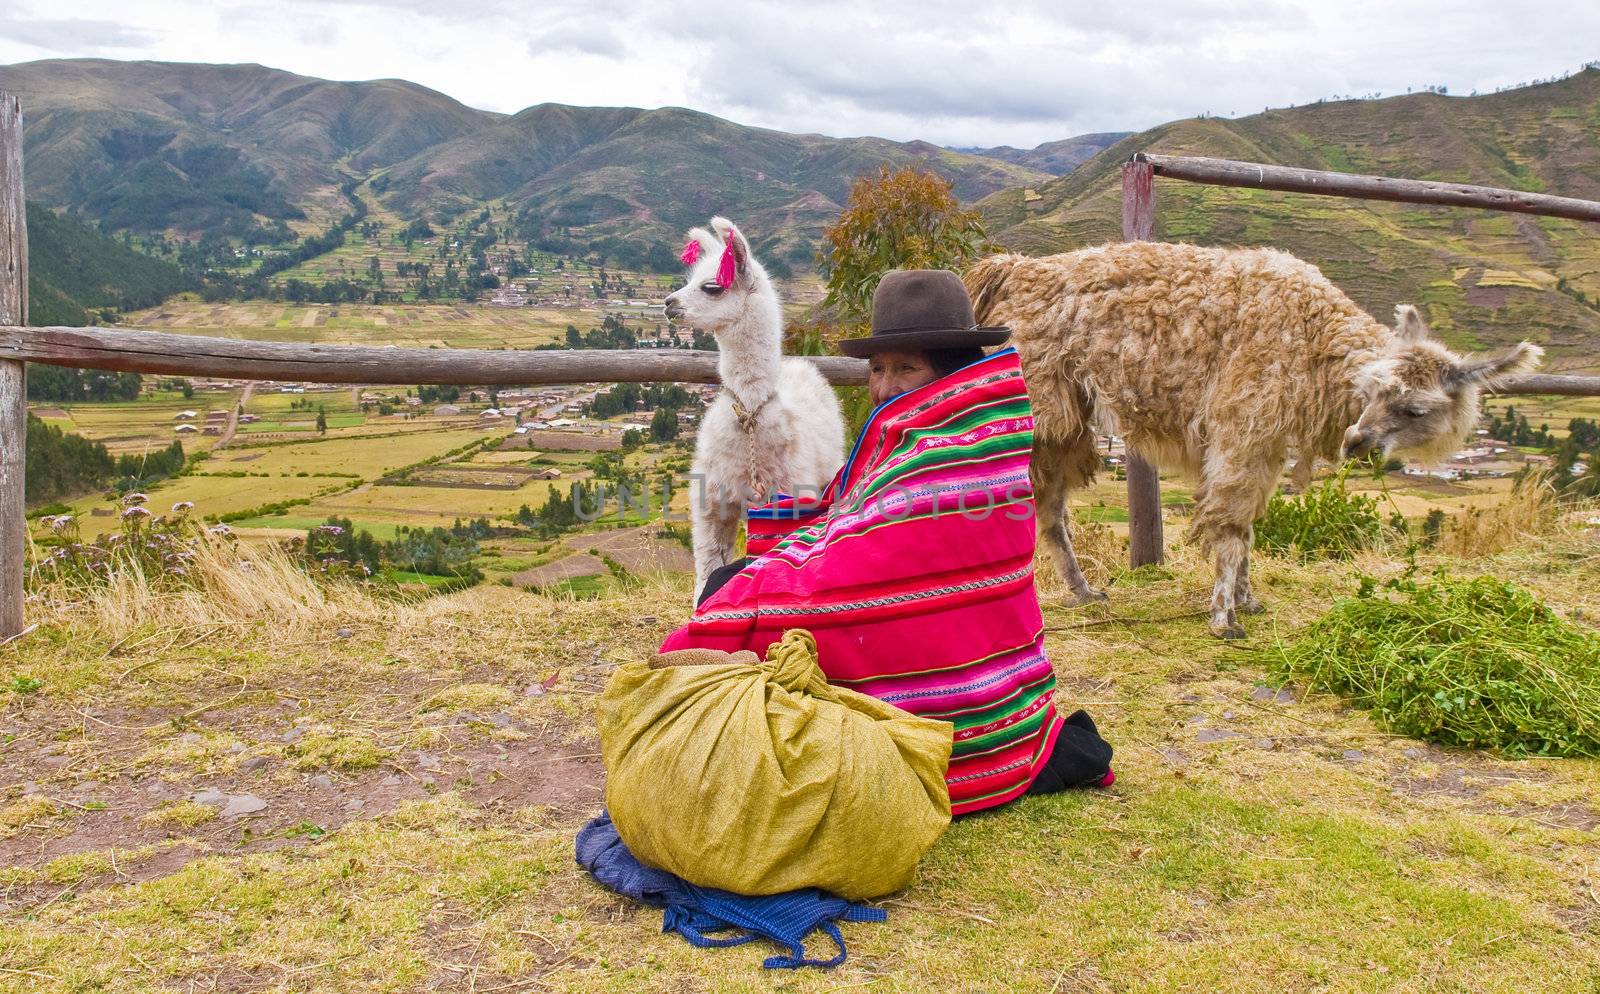 SACRED VALLEY,  PERU - MAY 27 : Unidentified Peruvian woman in traditional colorful clothes seat with here alpacas near a village in the sacred valley , Peru on May 27 2011